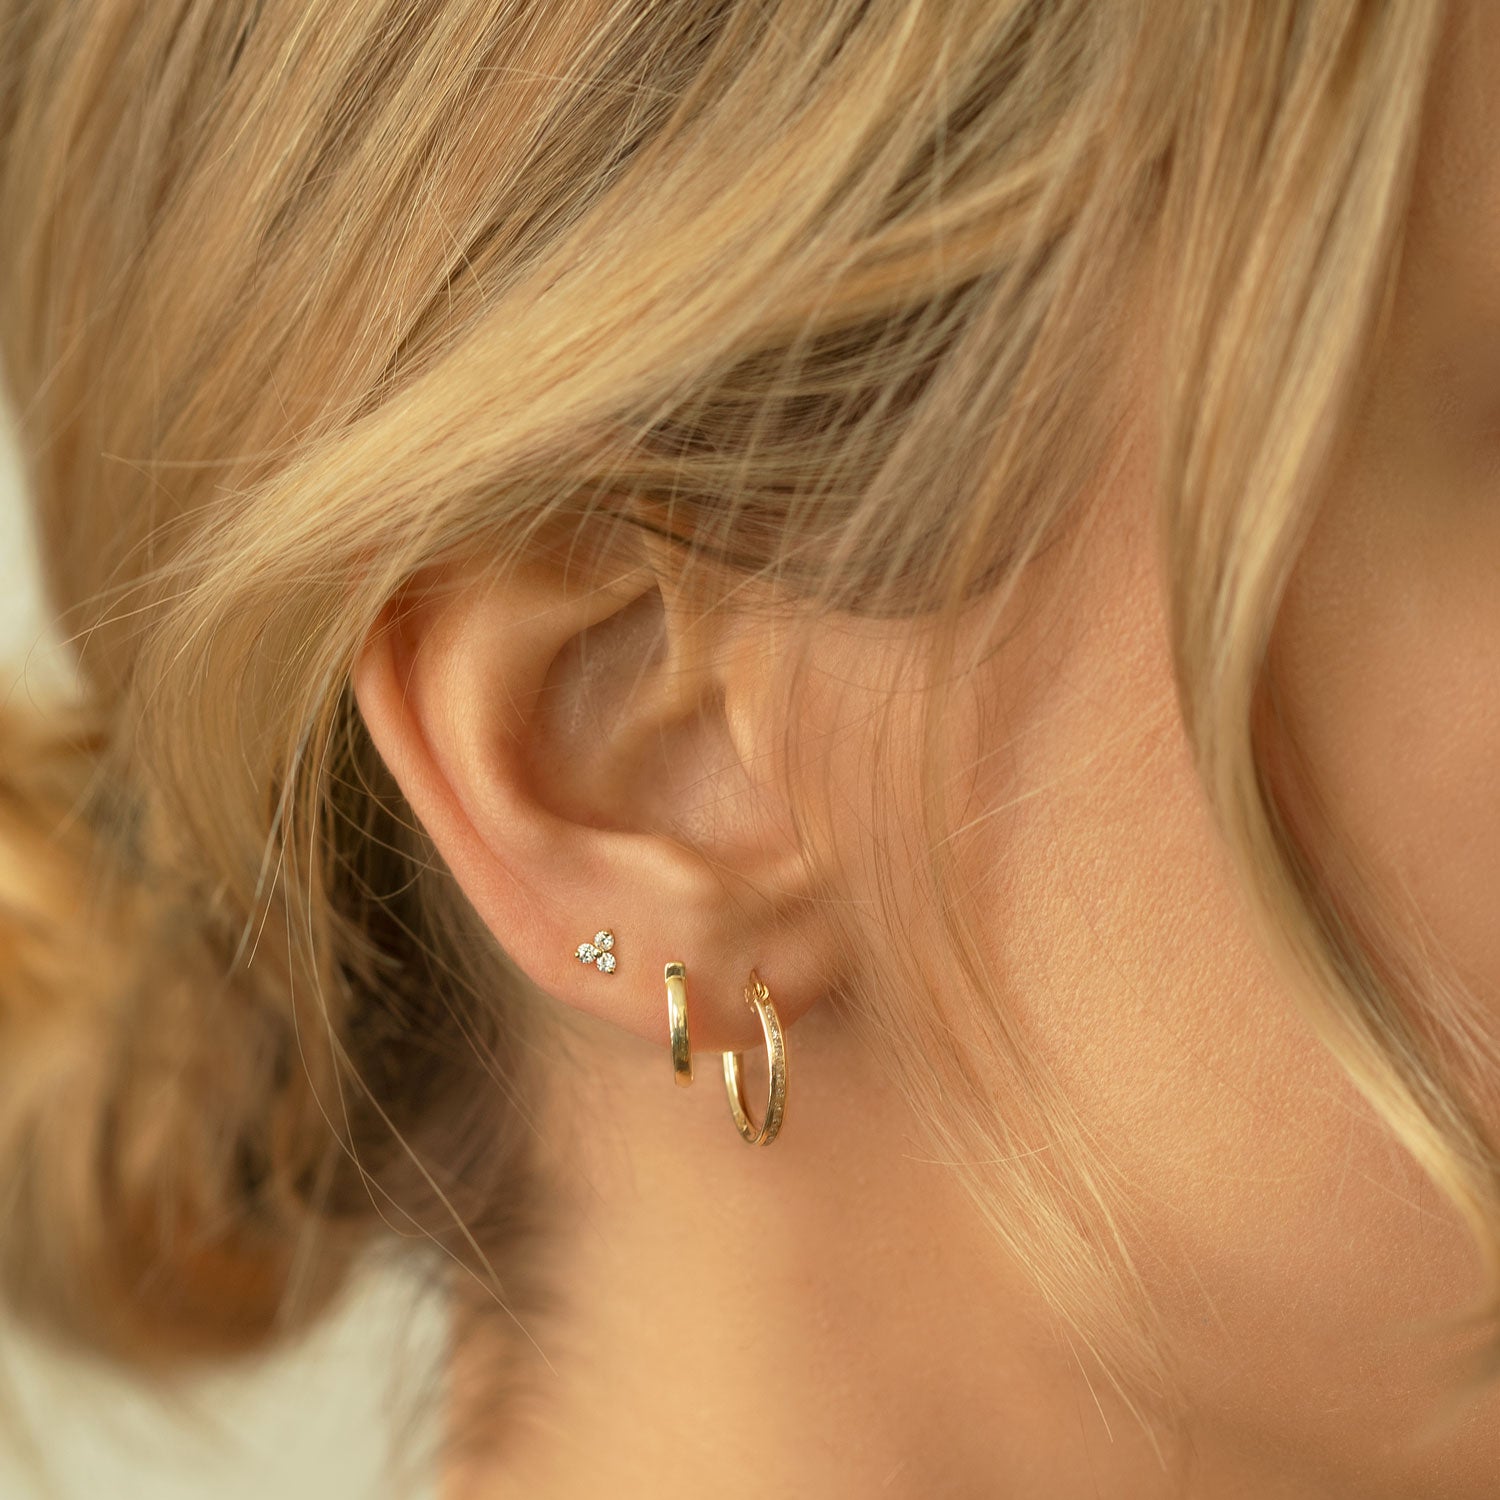 caption: Model wearing 6.5mm on second hole